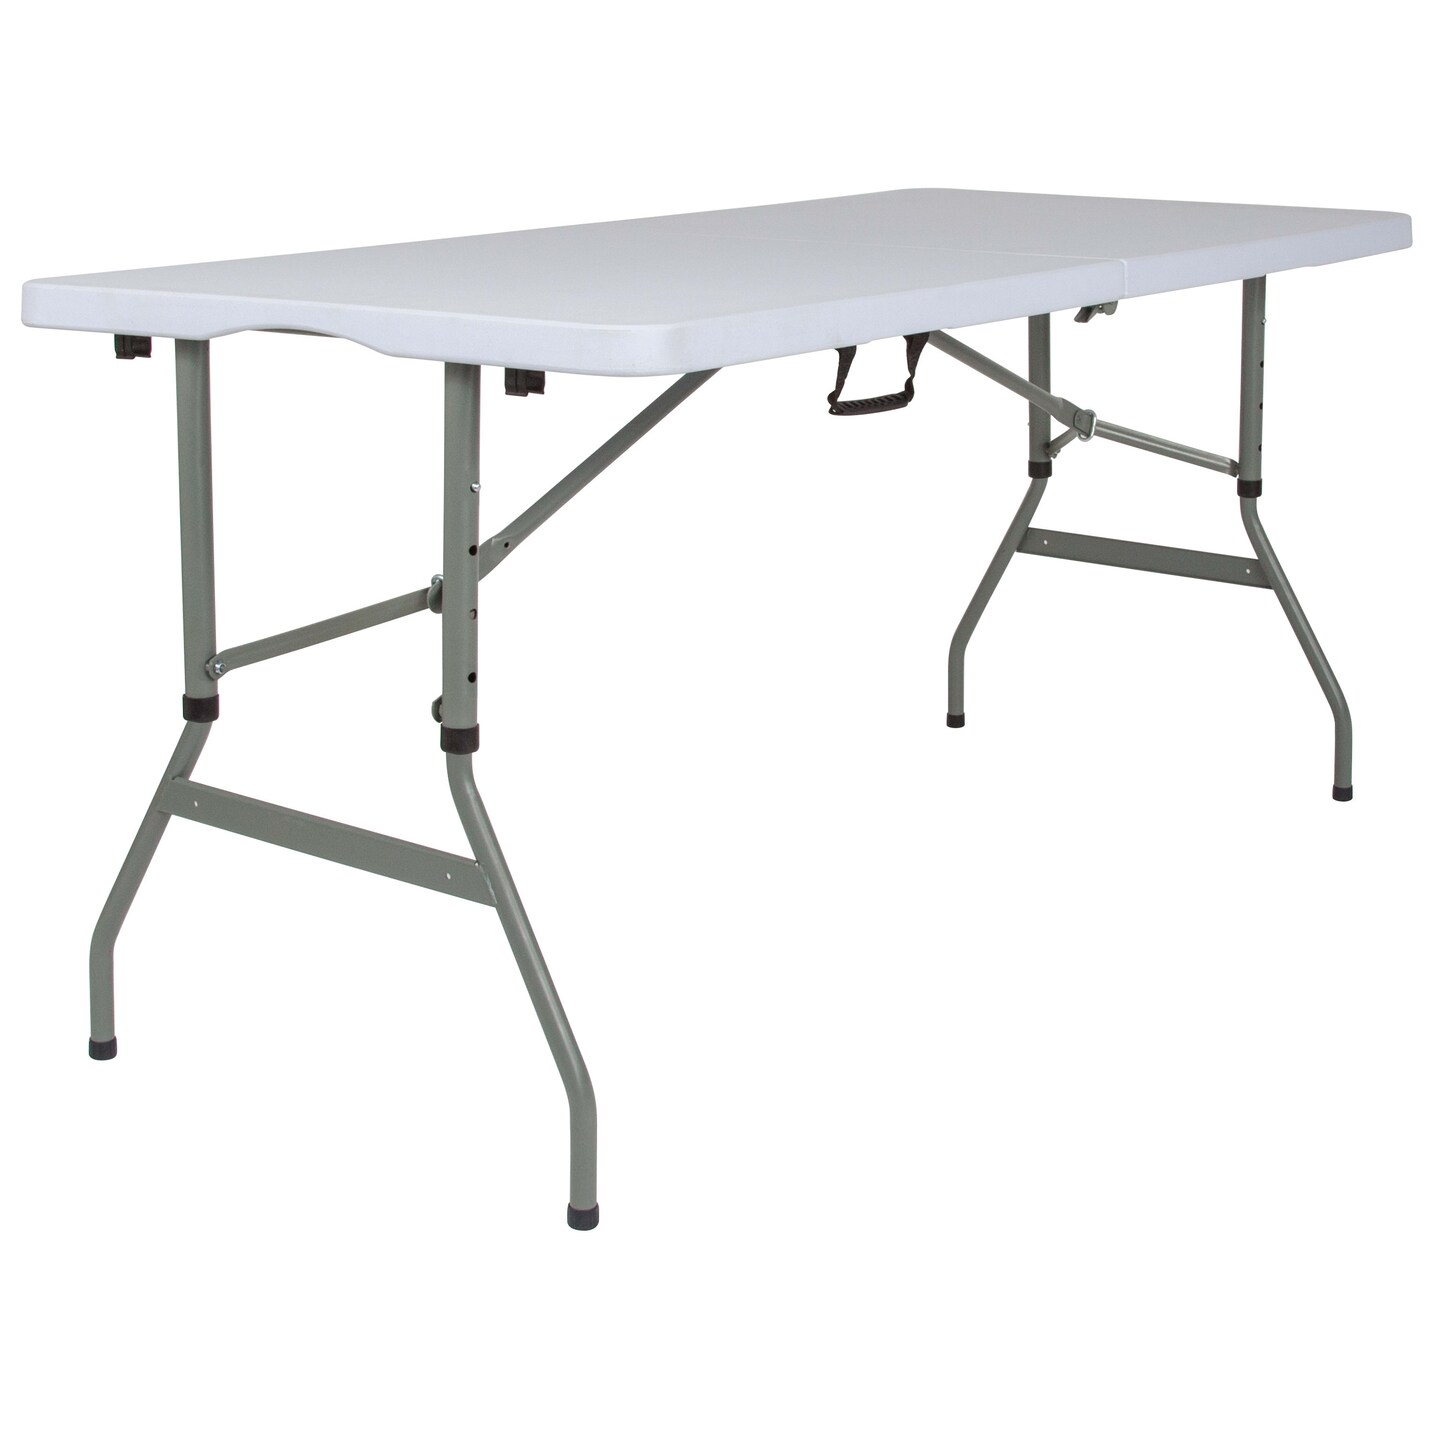 Emma and Oliver 5-Foot Height Adjustable Bi-Fold Plastic Banquet and Event Folding Table with Carrying Handle